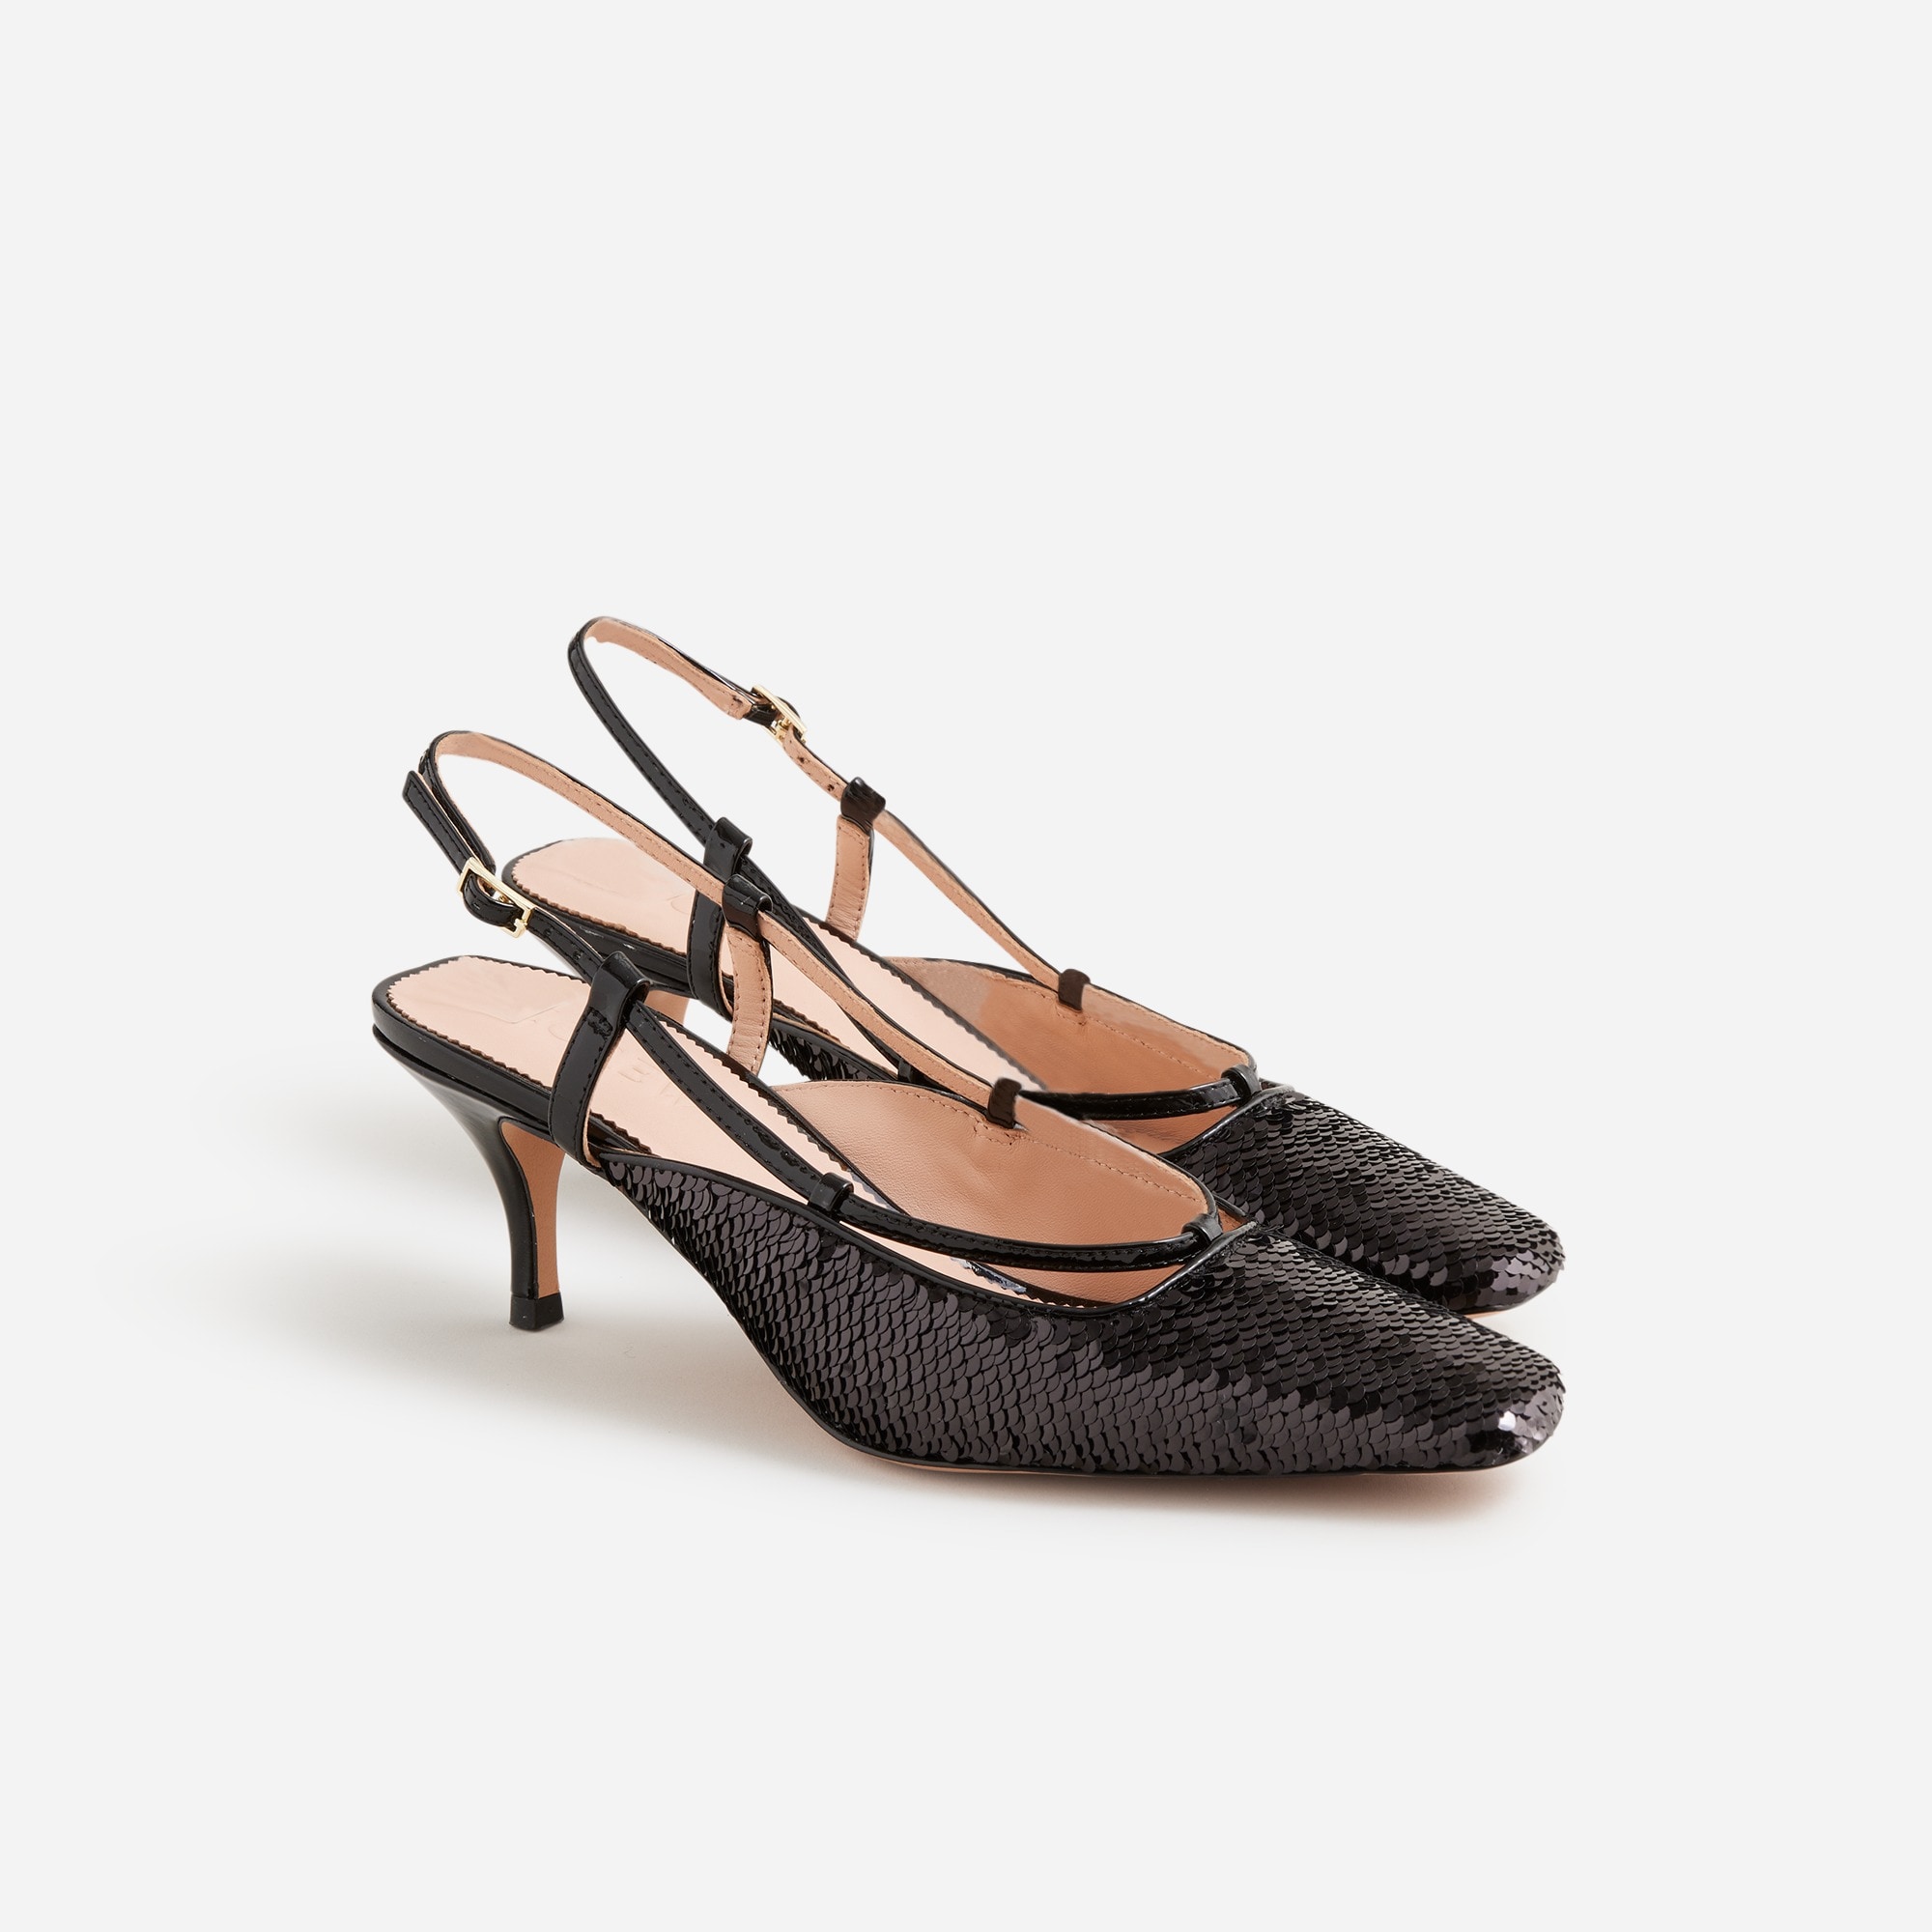  Leona slingback heels with paillettes